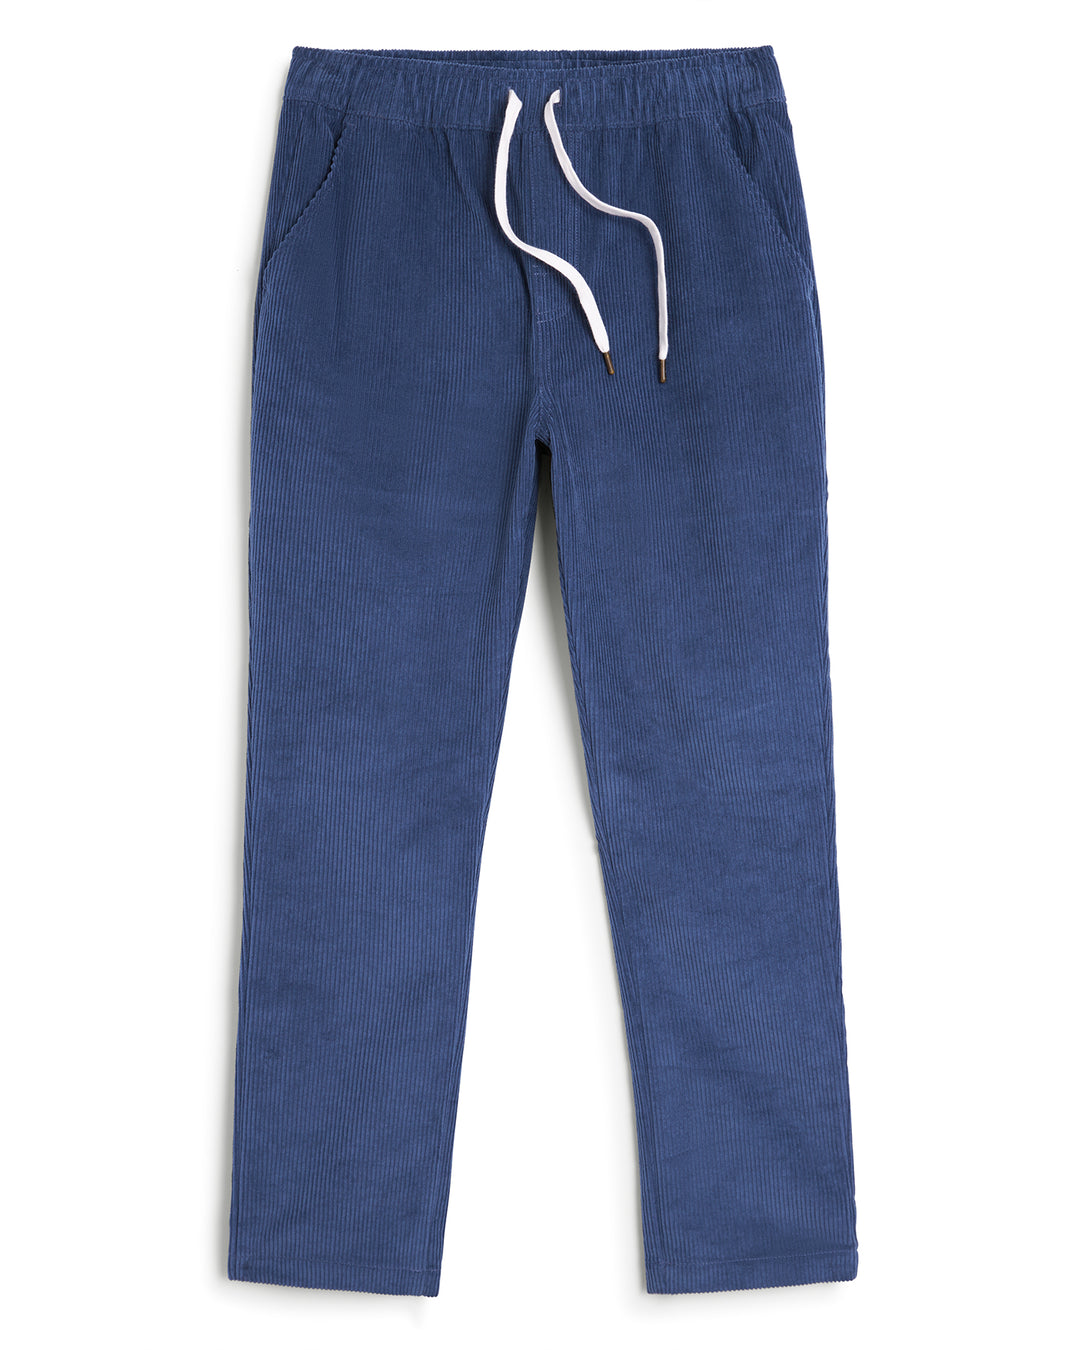 A blue corduroy Corsica Pant - Moontide from Dandy Del Mar with a drawstring.